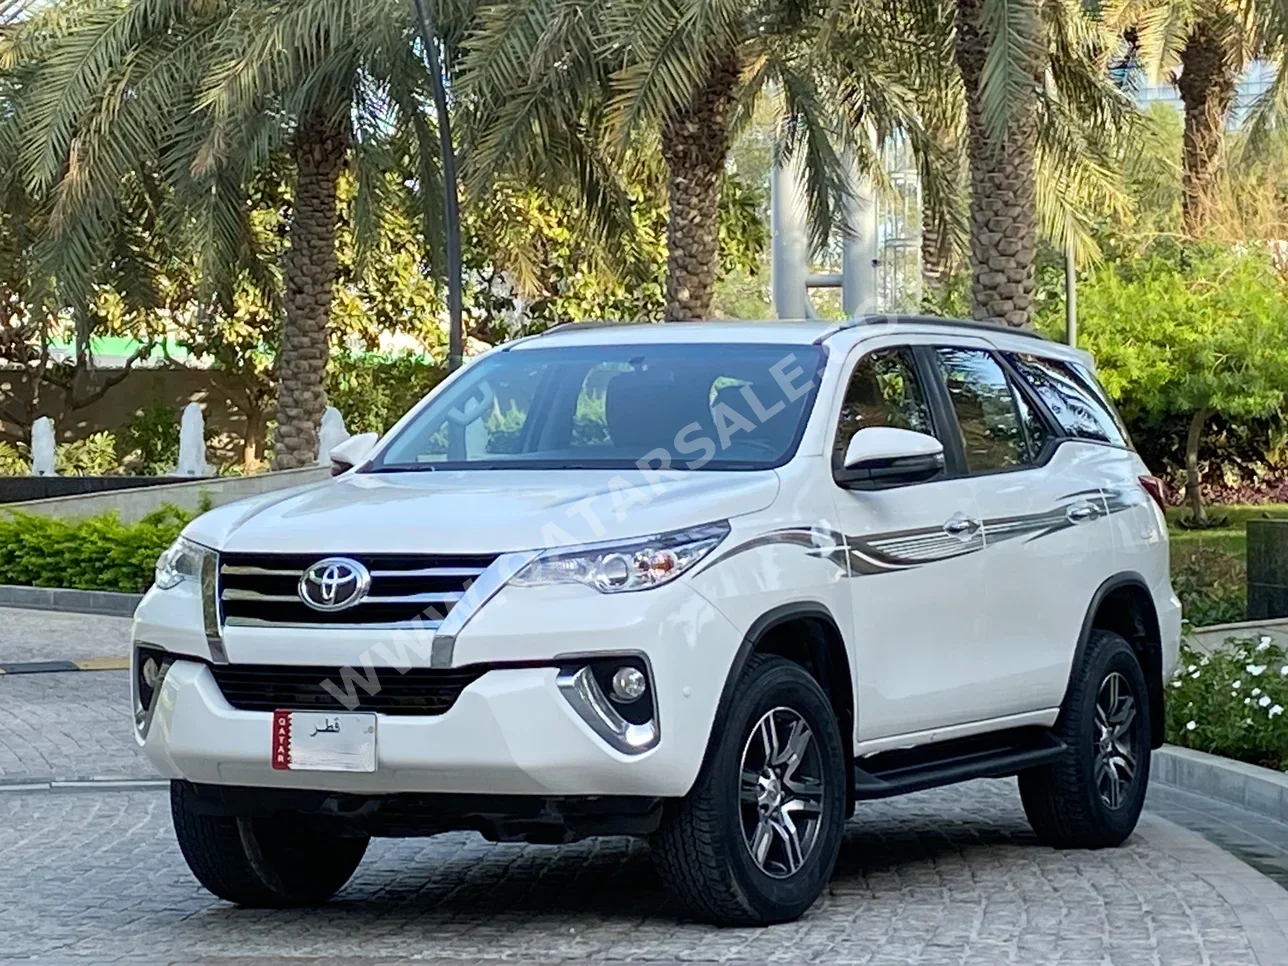 Toyota  Fortuner  2020  Automatic  42,000 Km  4 Cylinder  All Wheel Drive (AWD)  SUV  White